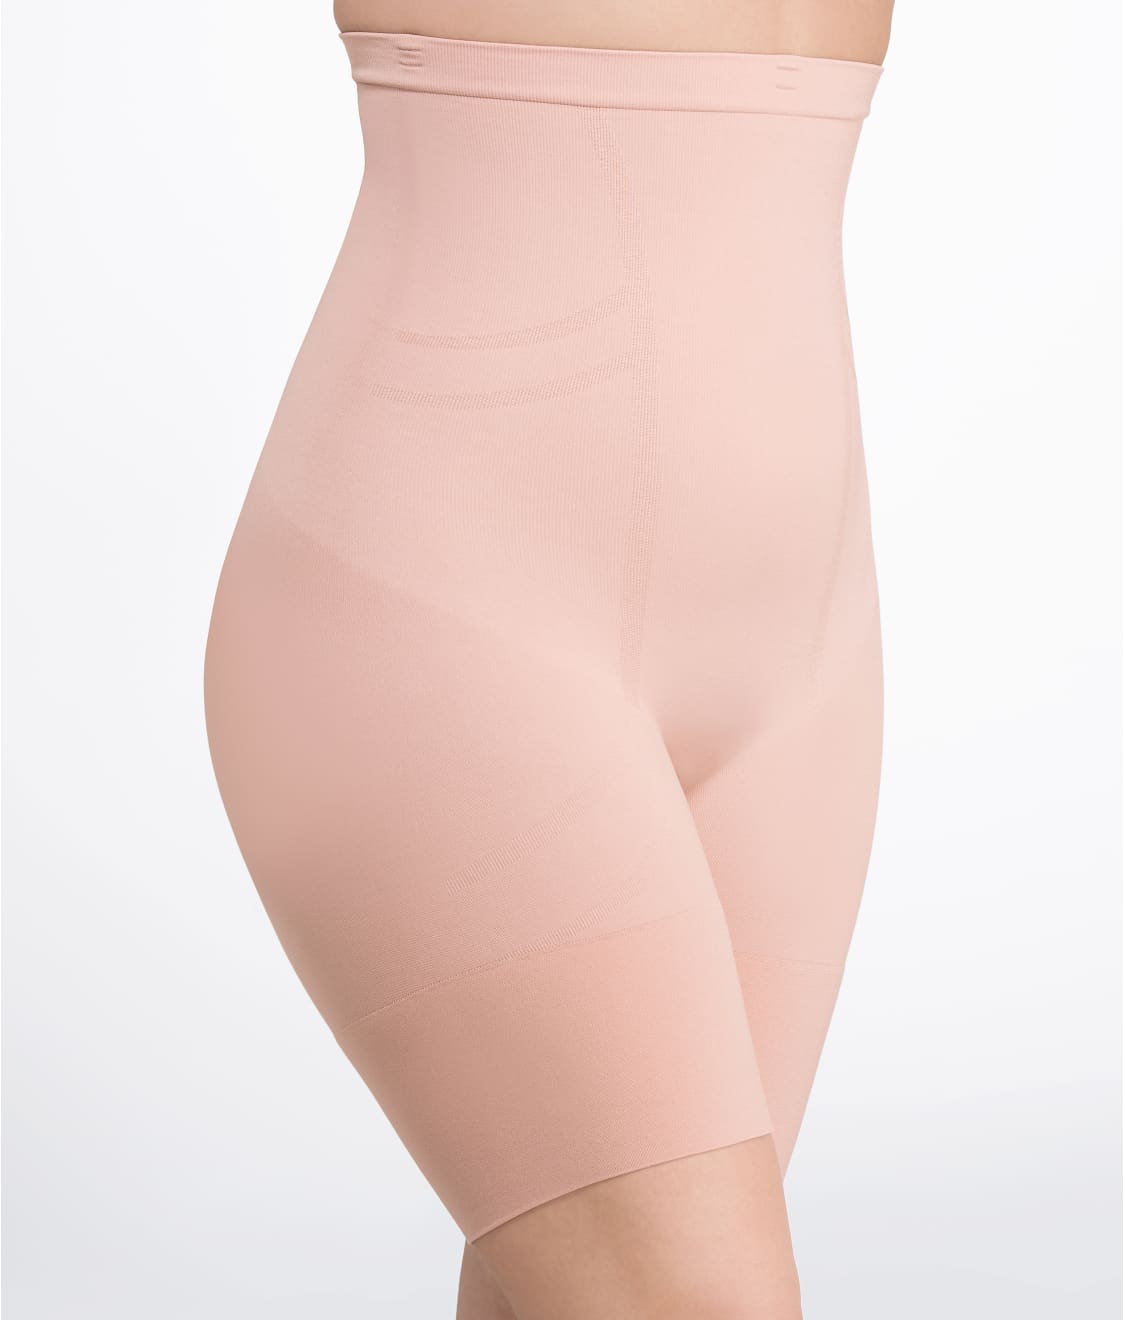 Plus Size Slim Cognito Firm Control High-Waist Shaper